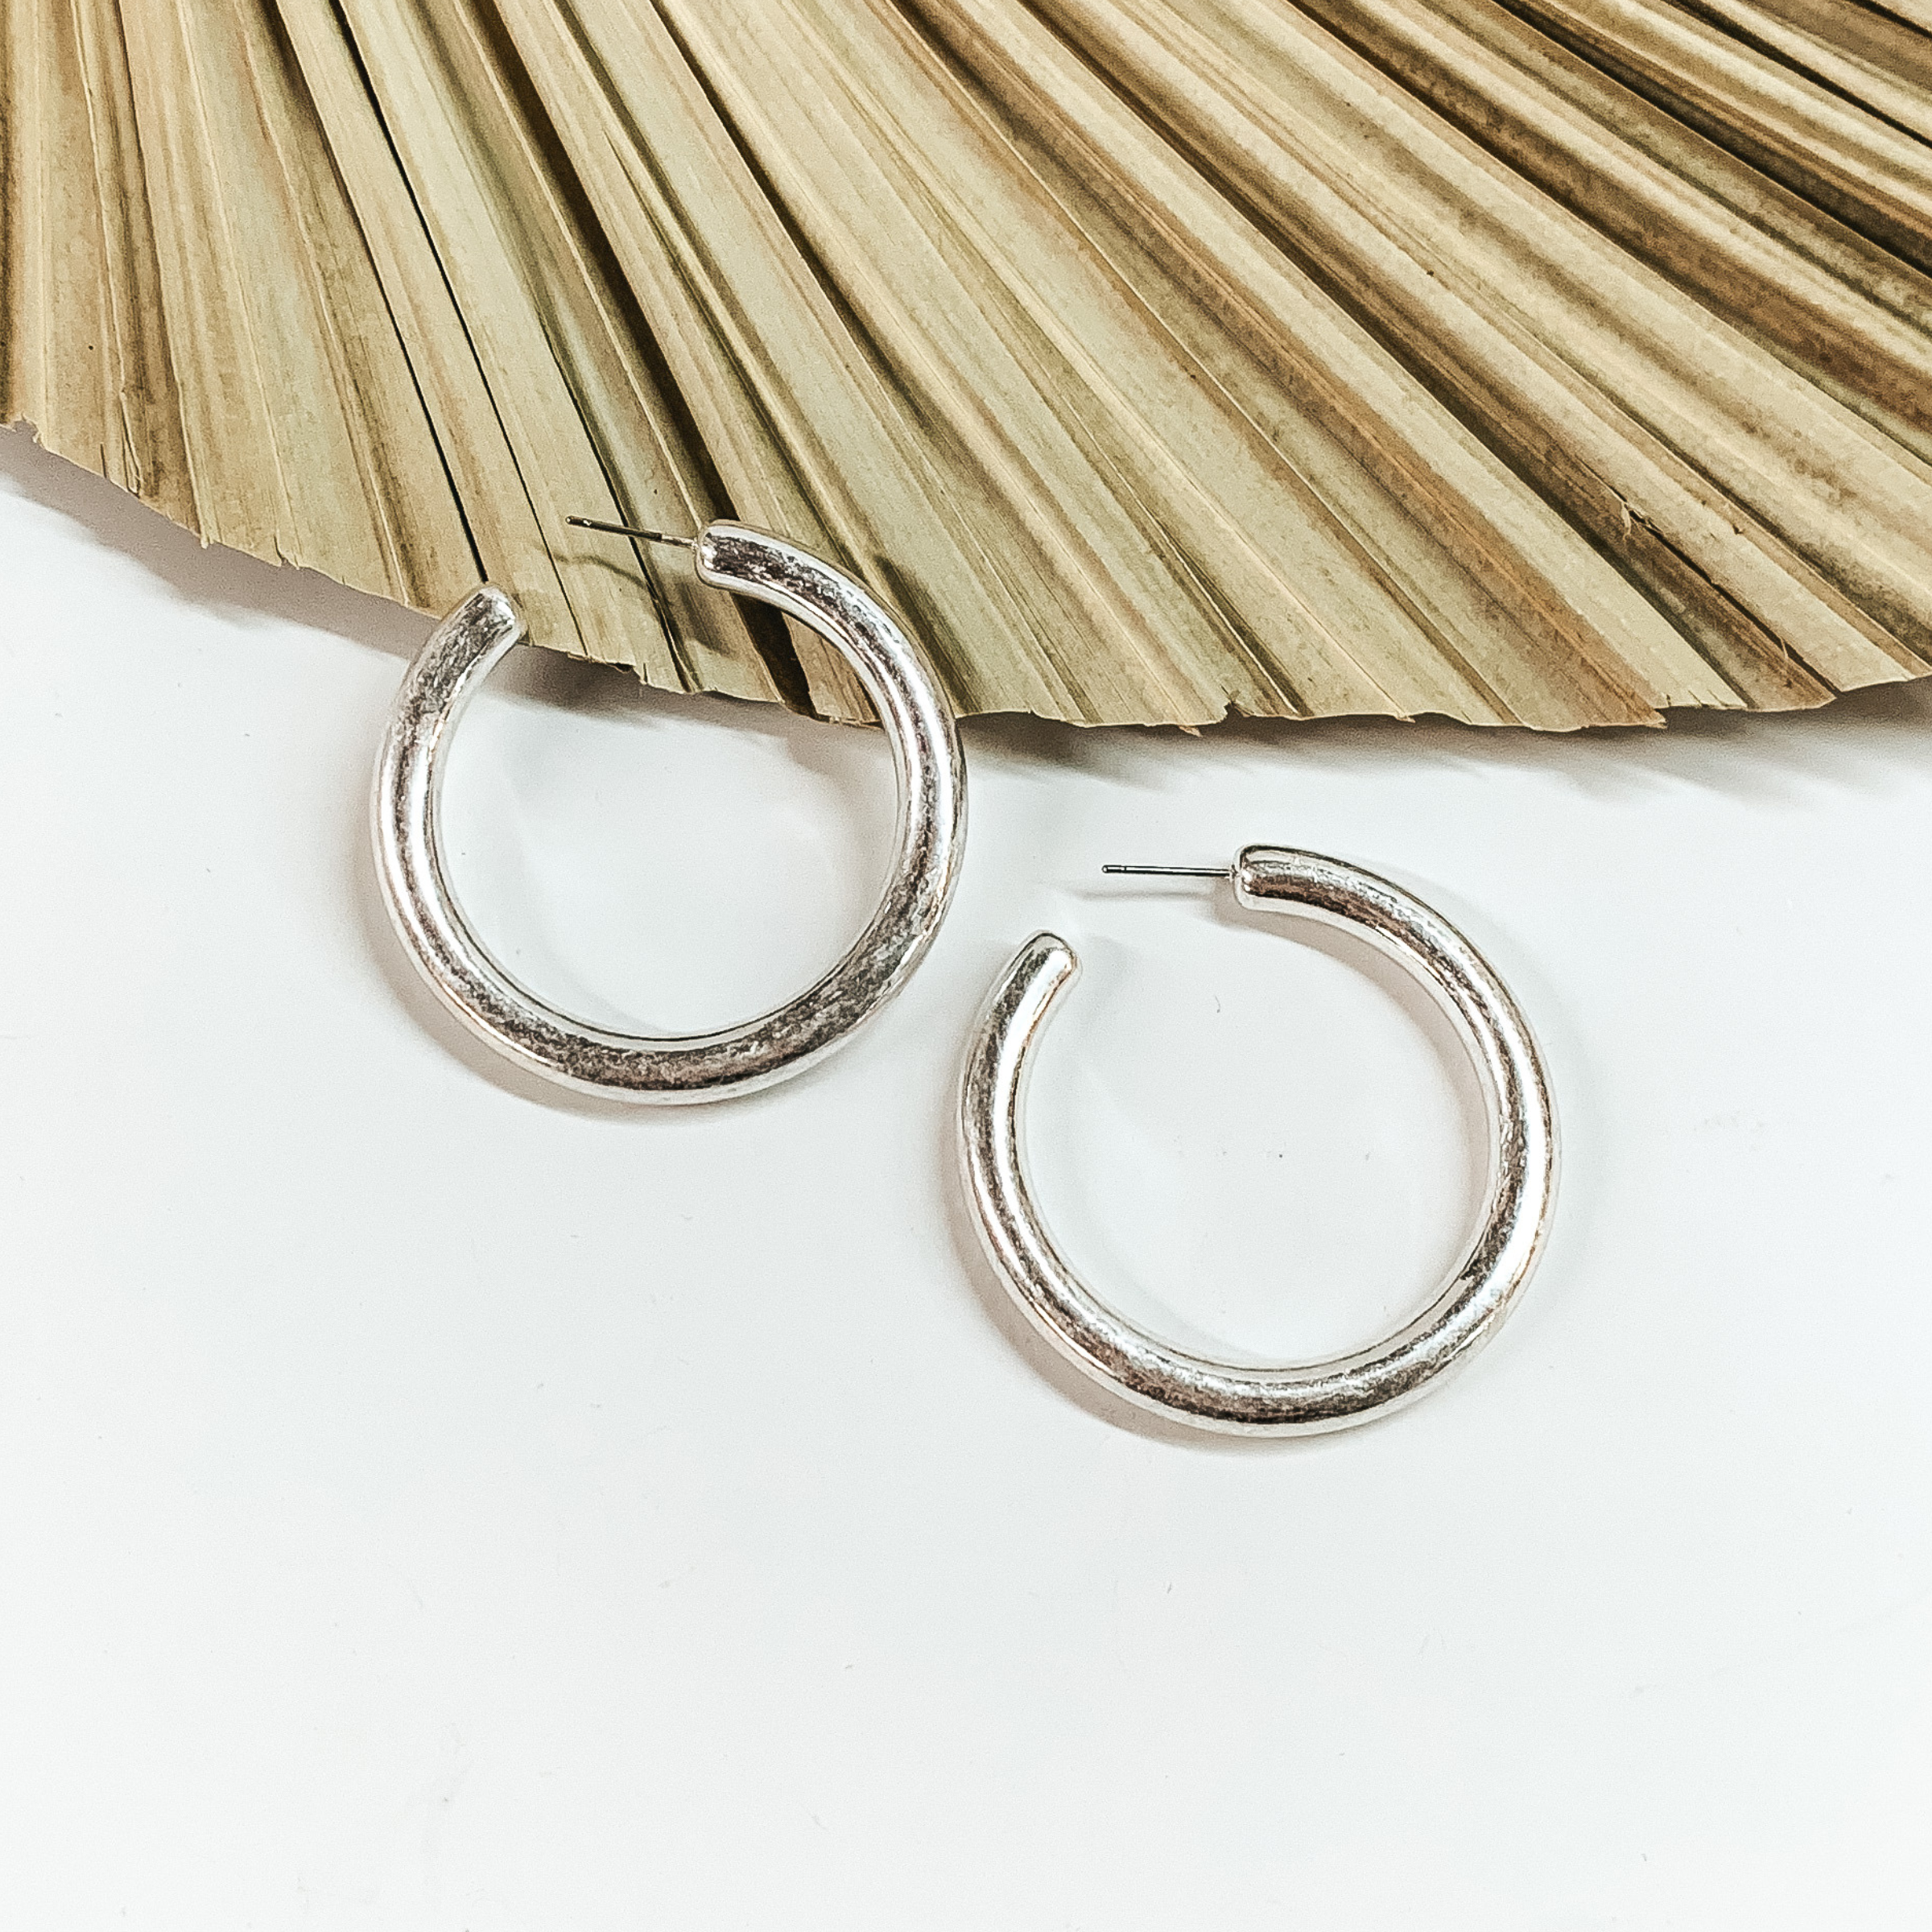 Clean Slate Large Hoop Earrings in Worn Silver Tone - Giddy Up Glamour Boutique